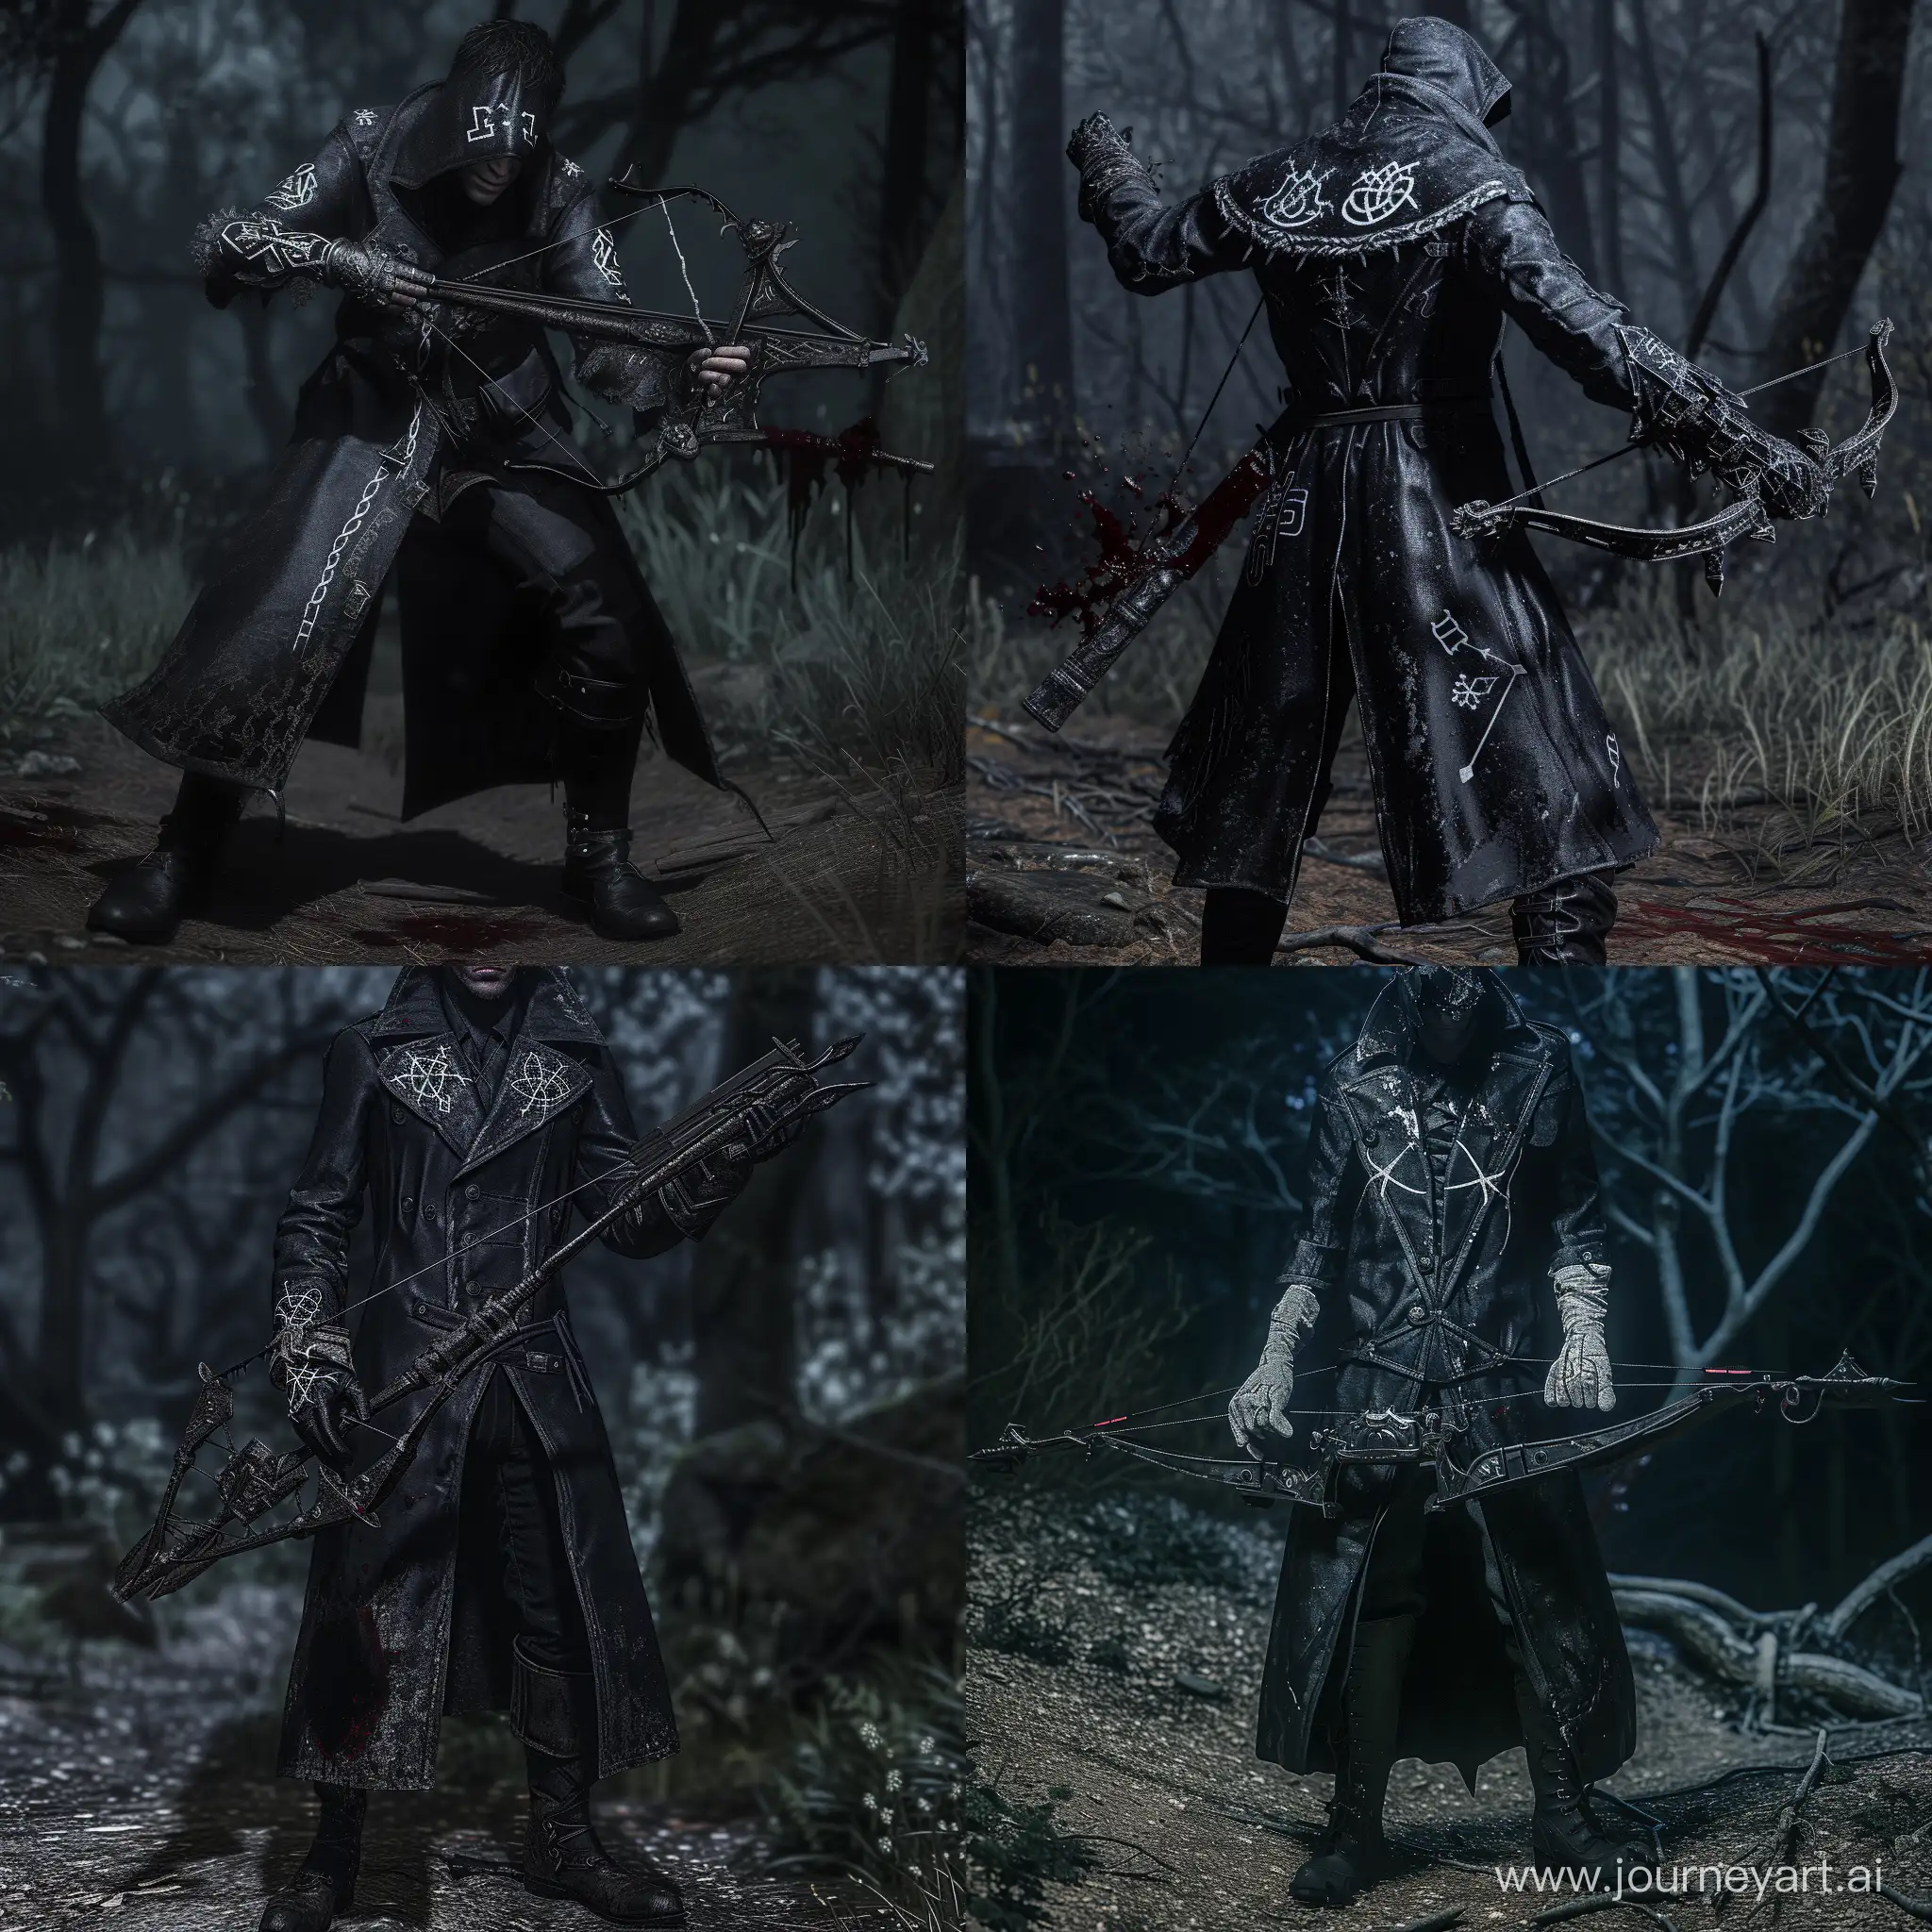 a man wearing, Sleek, jet-black trench coat with silver runes, Exorcist gloves with symbols that banish the supernatural, Dark, high-laced boots for navigating haunted terrains, wields a crossbow with enchanted bolts, standing in a dark forest,  bloodborne aesthetic, 1970's dark fantasy, detailed, cosmic horror, gritty, dark lighting, edgy, blood on weapon, 64 bit